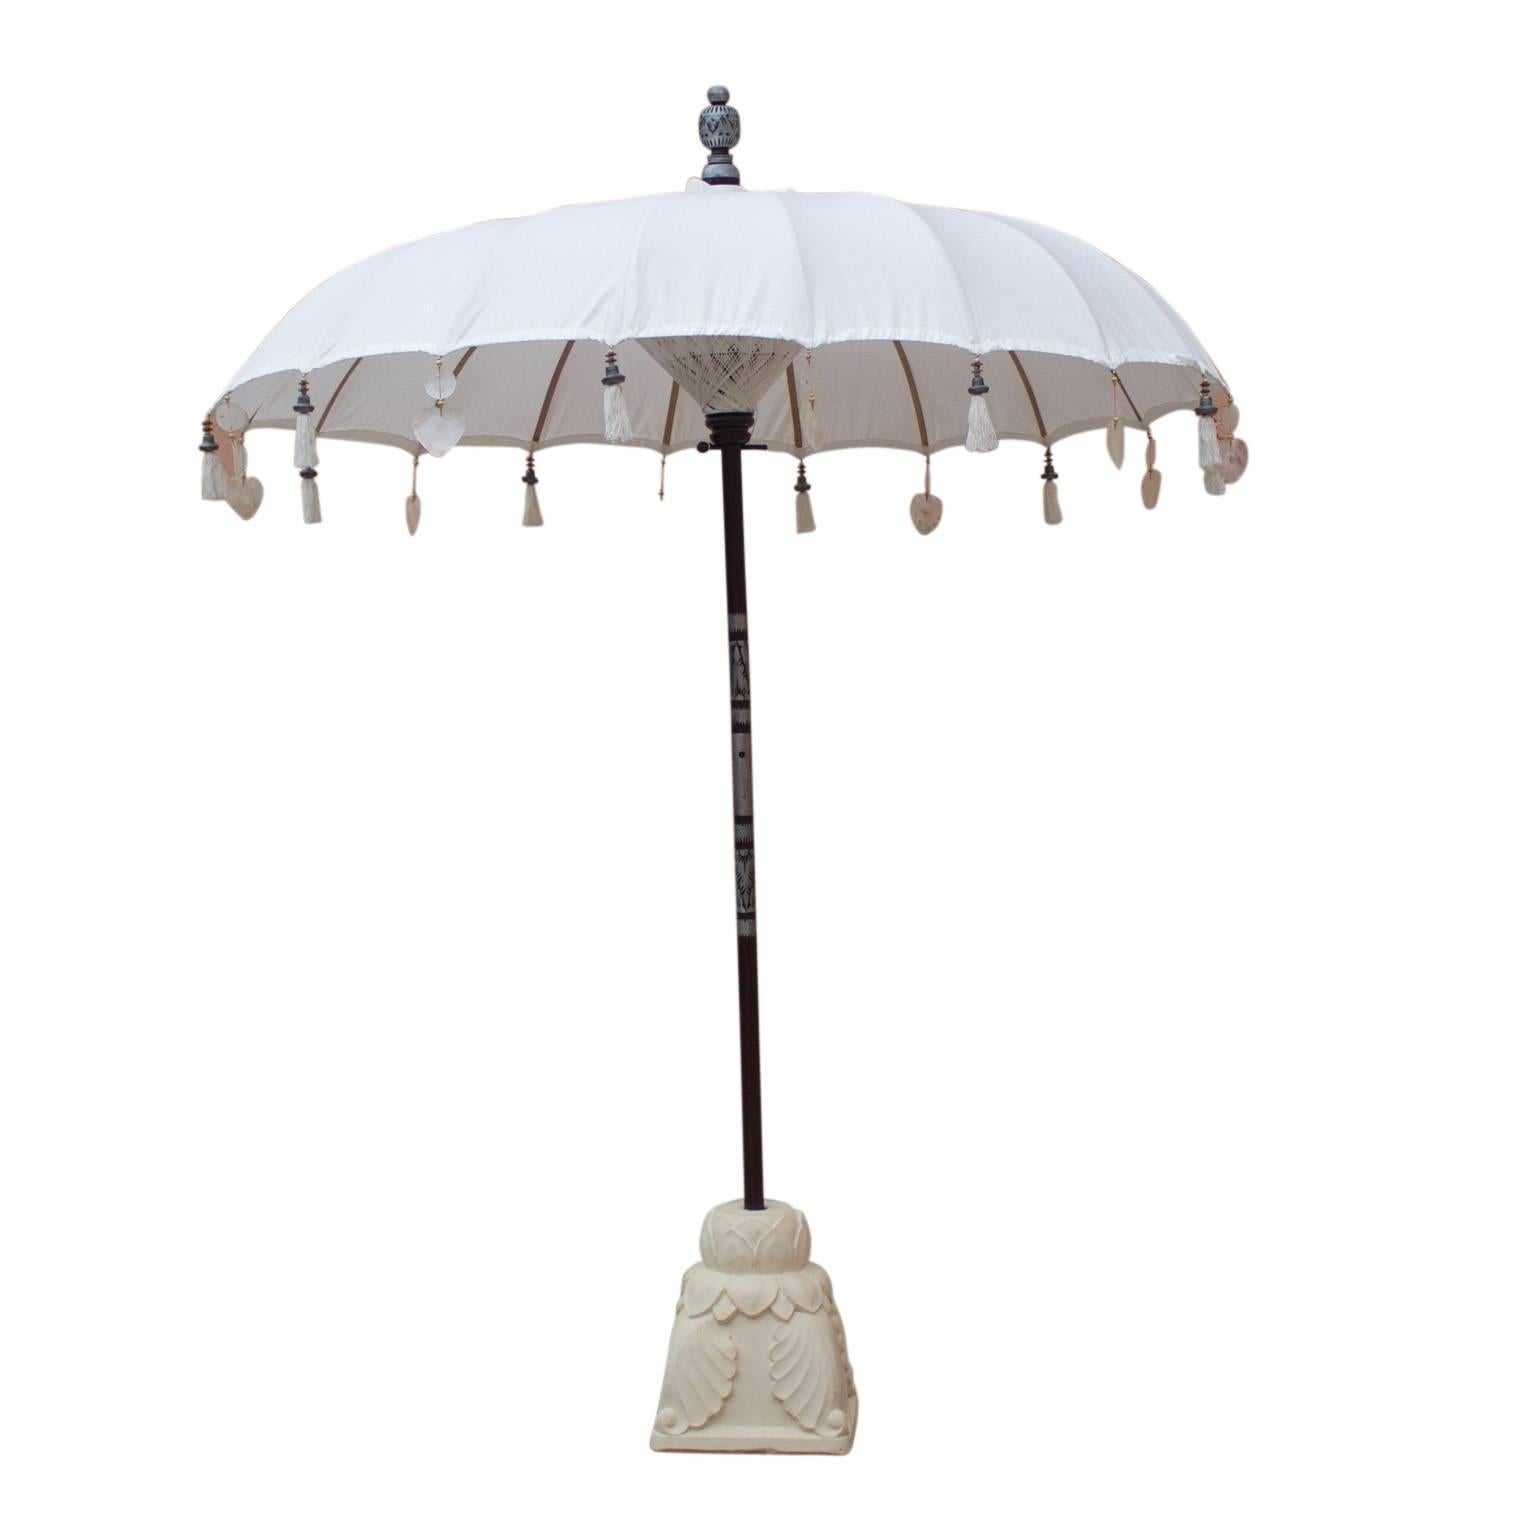 Exotic white cotton umbrella with bamboo ribs trimmed with carved wood and mother of pearl drops. The two-piece pole is decorated with tribal unscripted metal, as is the finial. All of this set in a heavy hand cast sandstone base with lotus and